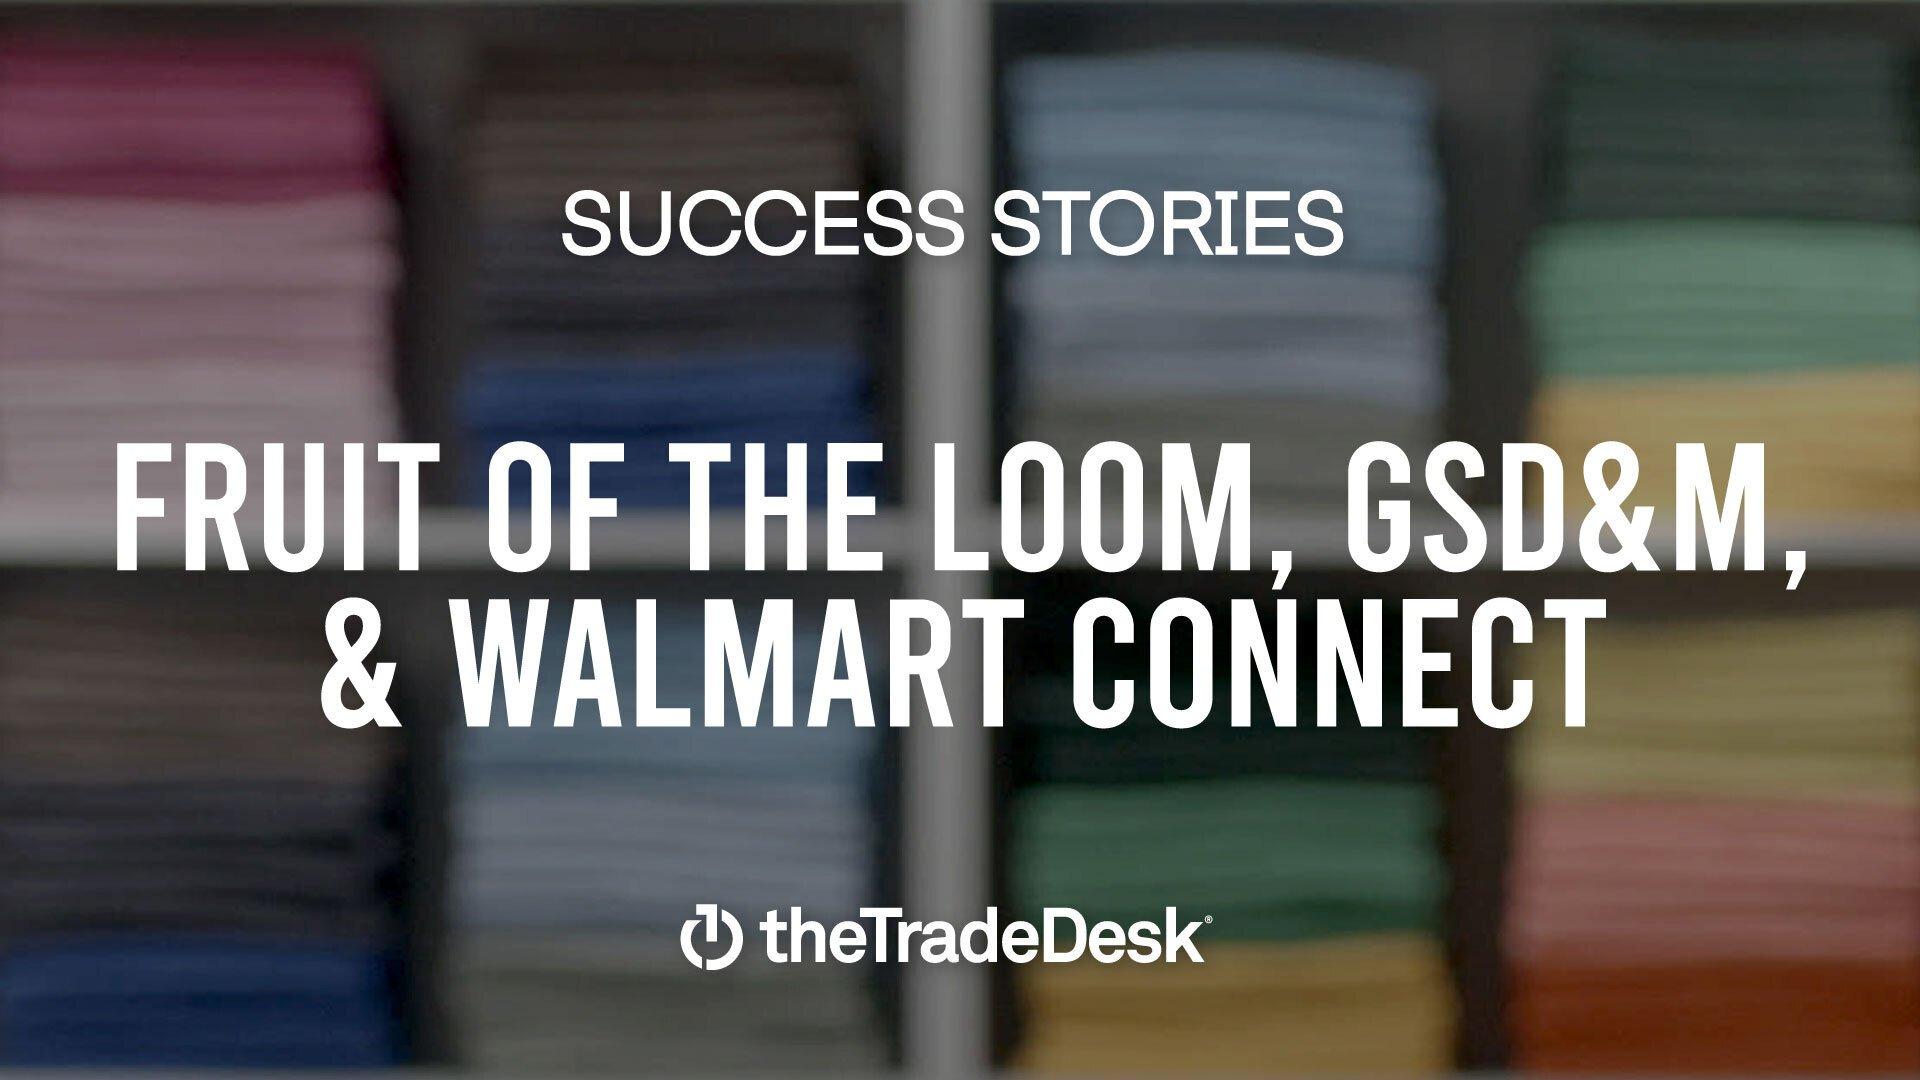 Fruit of the Loom, GSD&M, & Walmart Connect